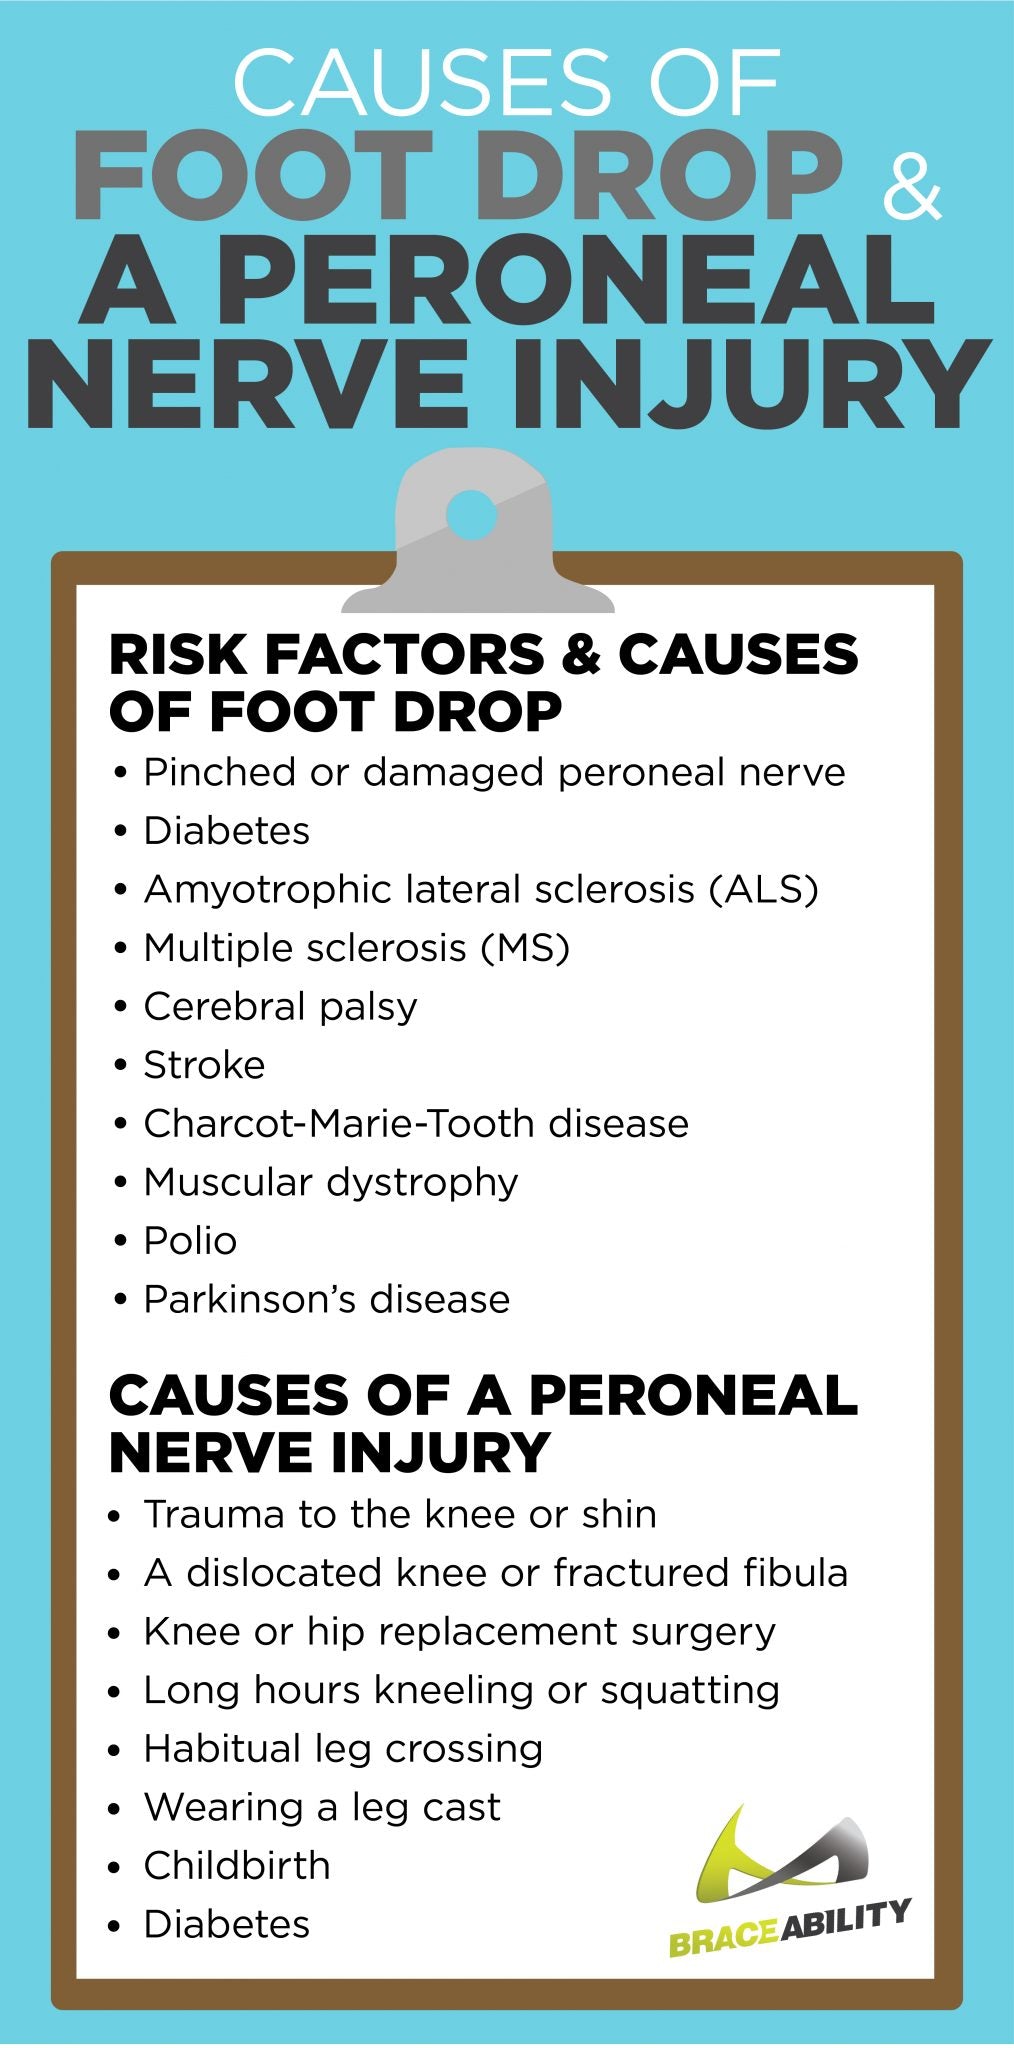 risks of foot drop and the difference between the causes of a peroneal nerve injury